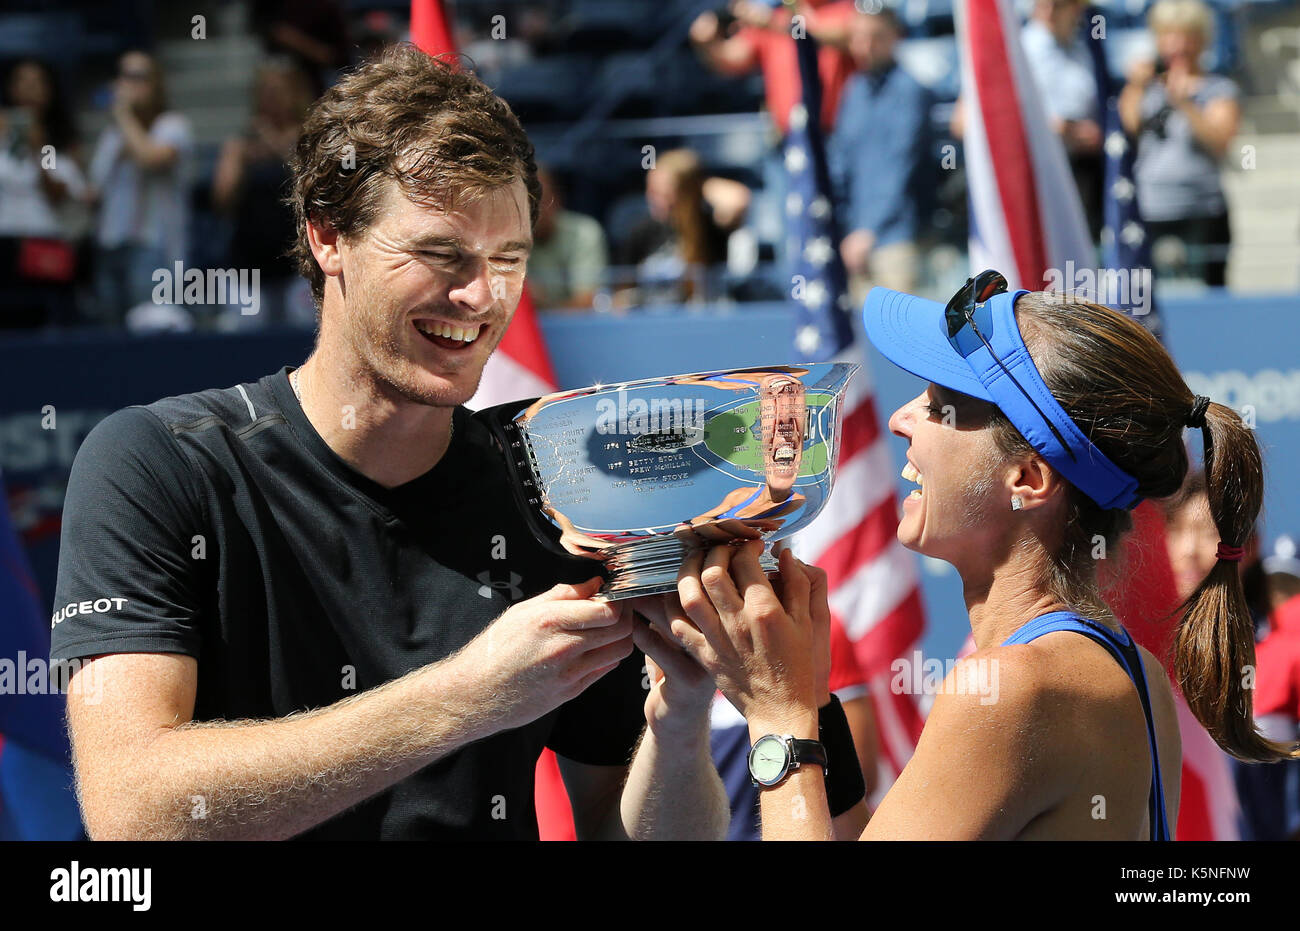 New York, USA. 9th Sep, 2017. Martina Hingis (R) of Switzerland and Jamie Murray of Great Britain attend the awarding ceremony after their mixed doubles final match against Hao-Ching Chan of Chinese Taipei and Michael Venus of New Zealand at the 2017 US Open in New York, the United States, Sept. 9, 2017. Martina Hingis and Jamie Murray won 2-1 to claim the title. Credit: Qin Lang/Xinhua/Alamy Live News Stock Photo